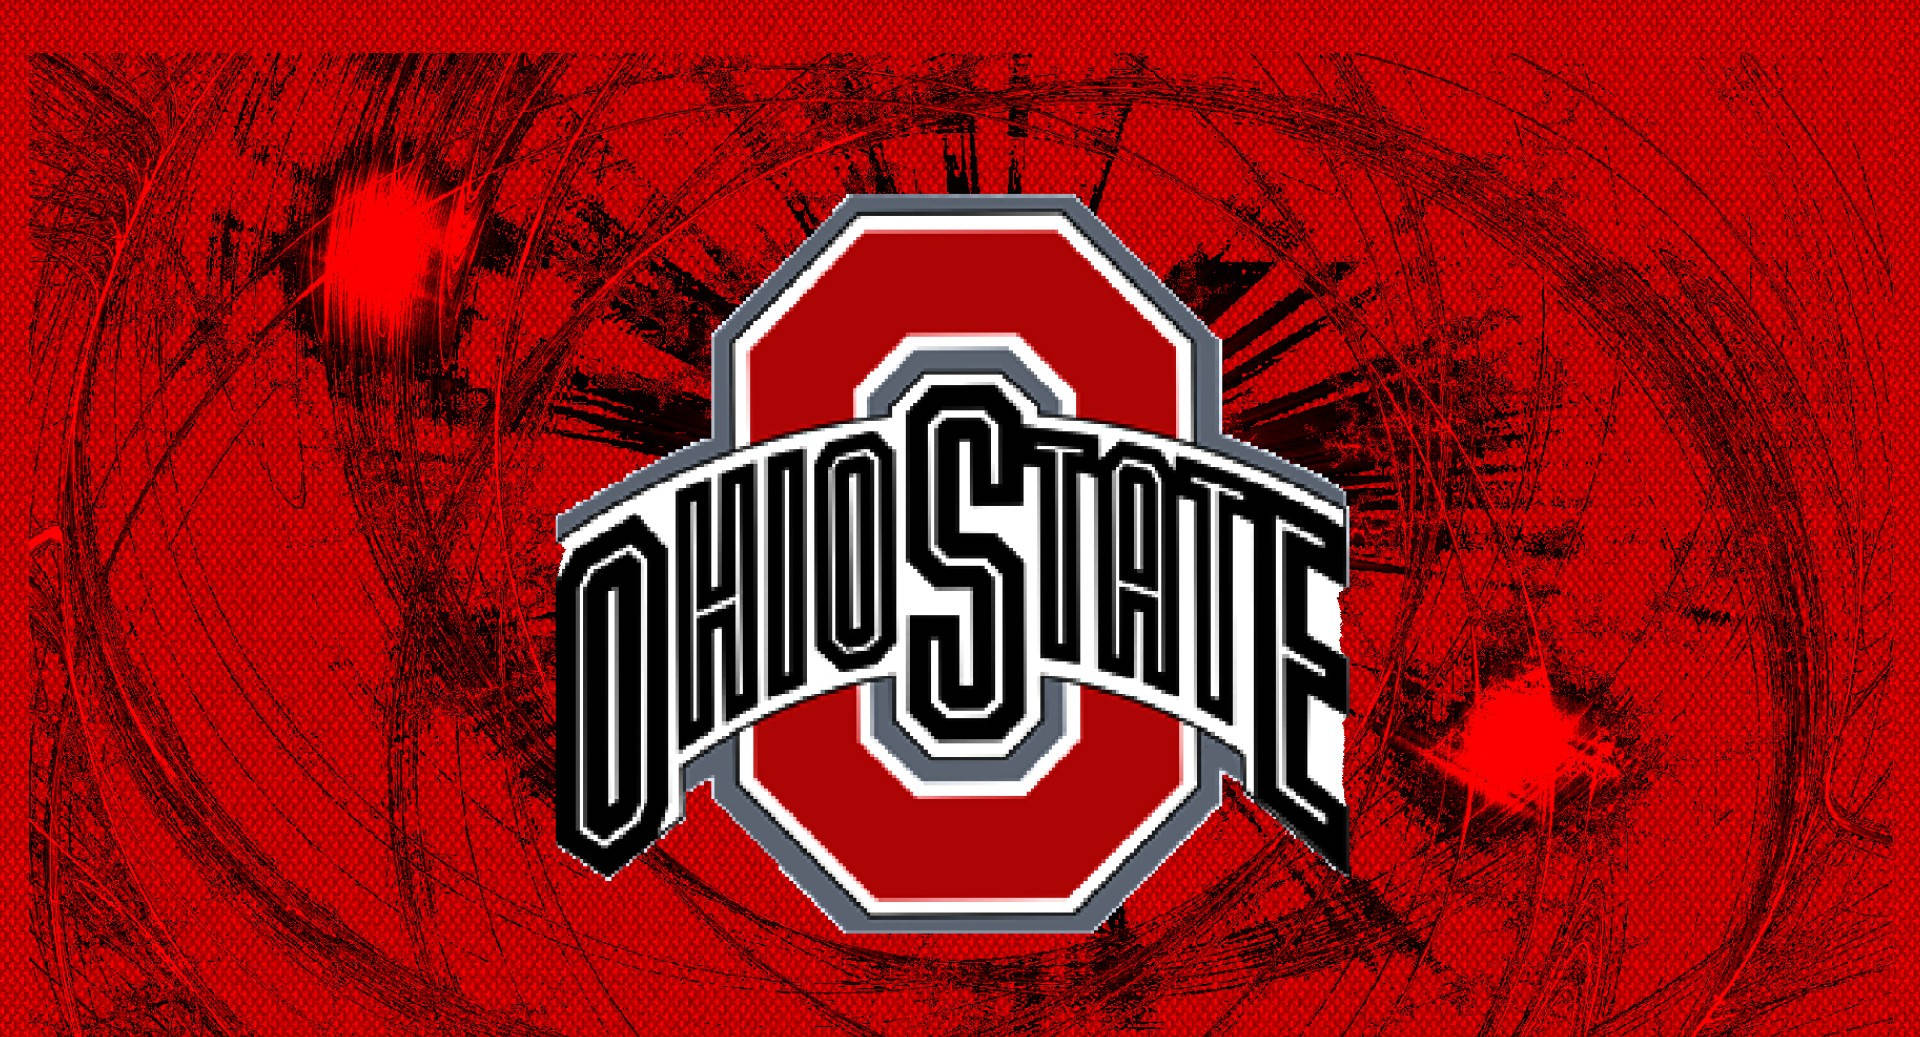 Ohio State University Scratched Red Wallpaper